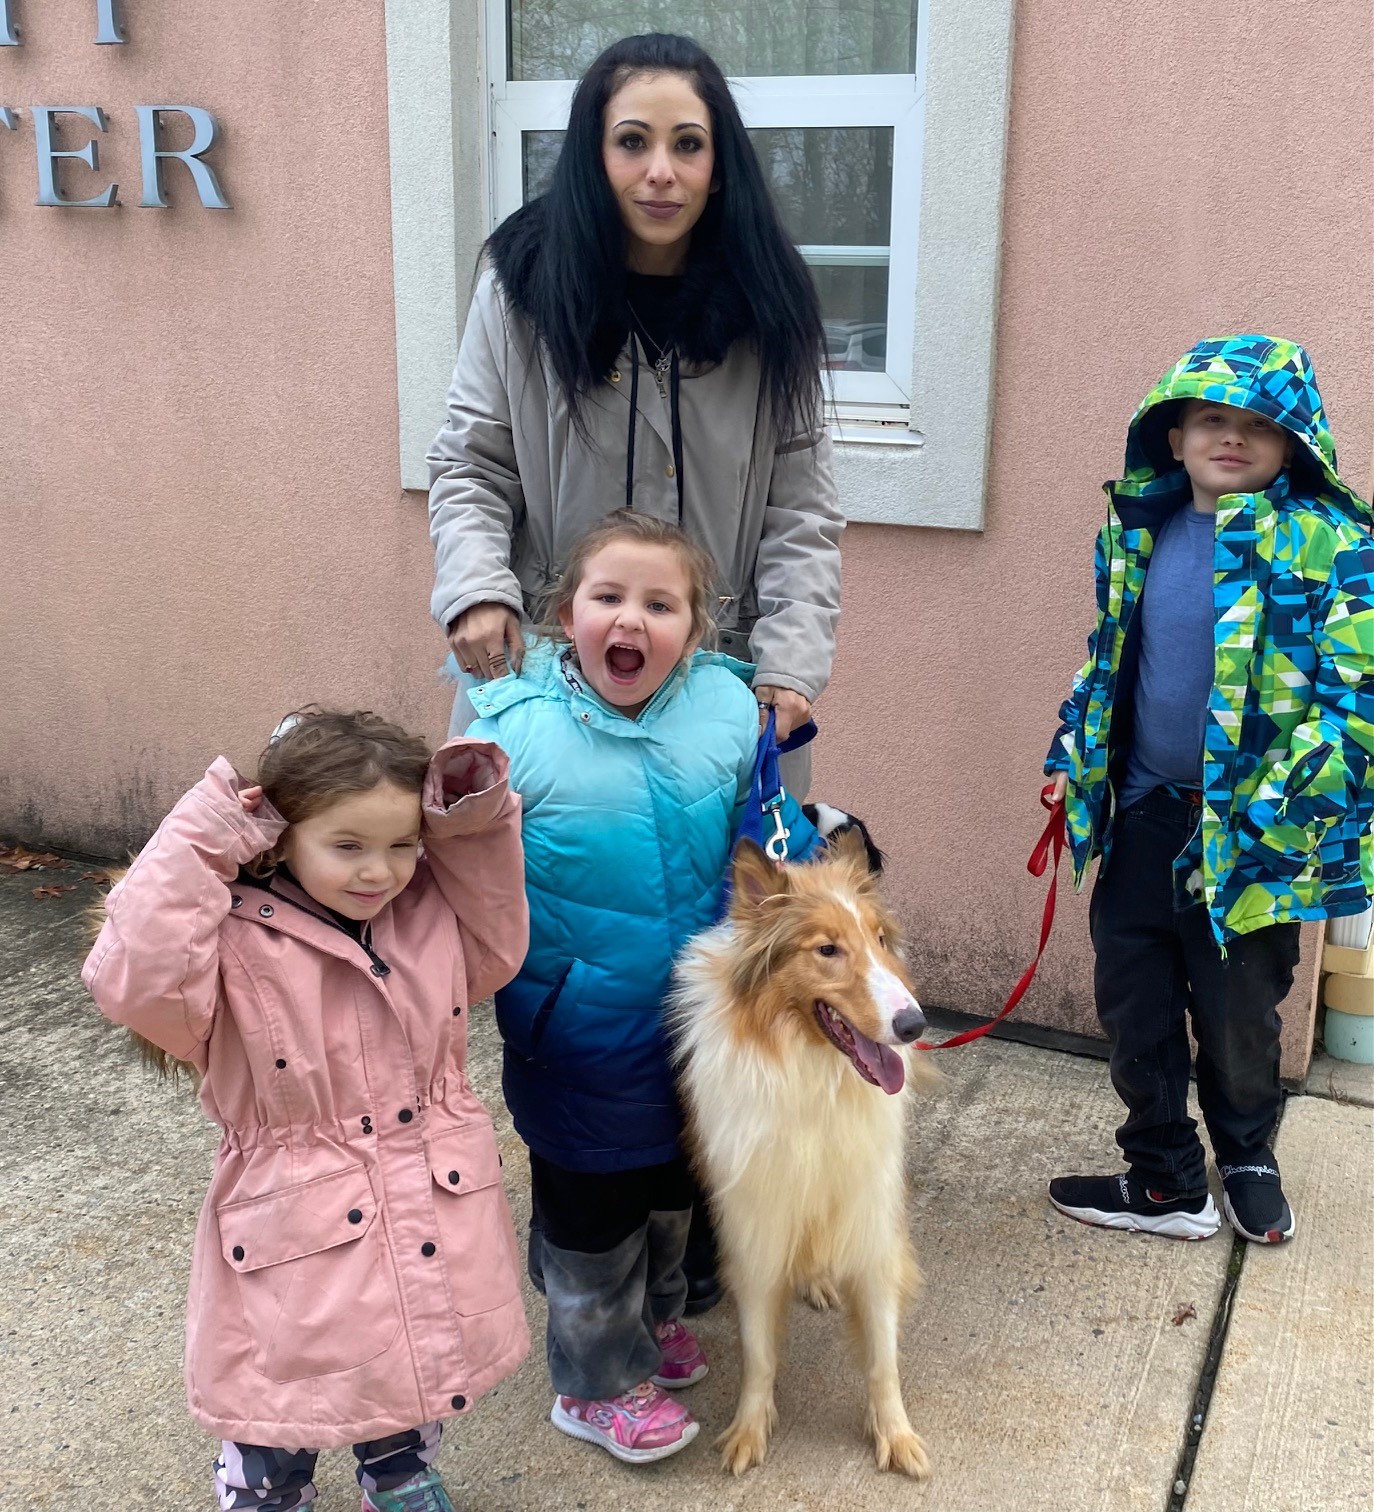 HOME FOR THE HOLIDAYS! ROCKY THE COLLIE REUNITED WITH FAMILY AFTER RESCUE FROM HOARDER.